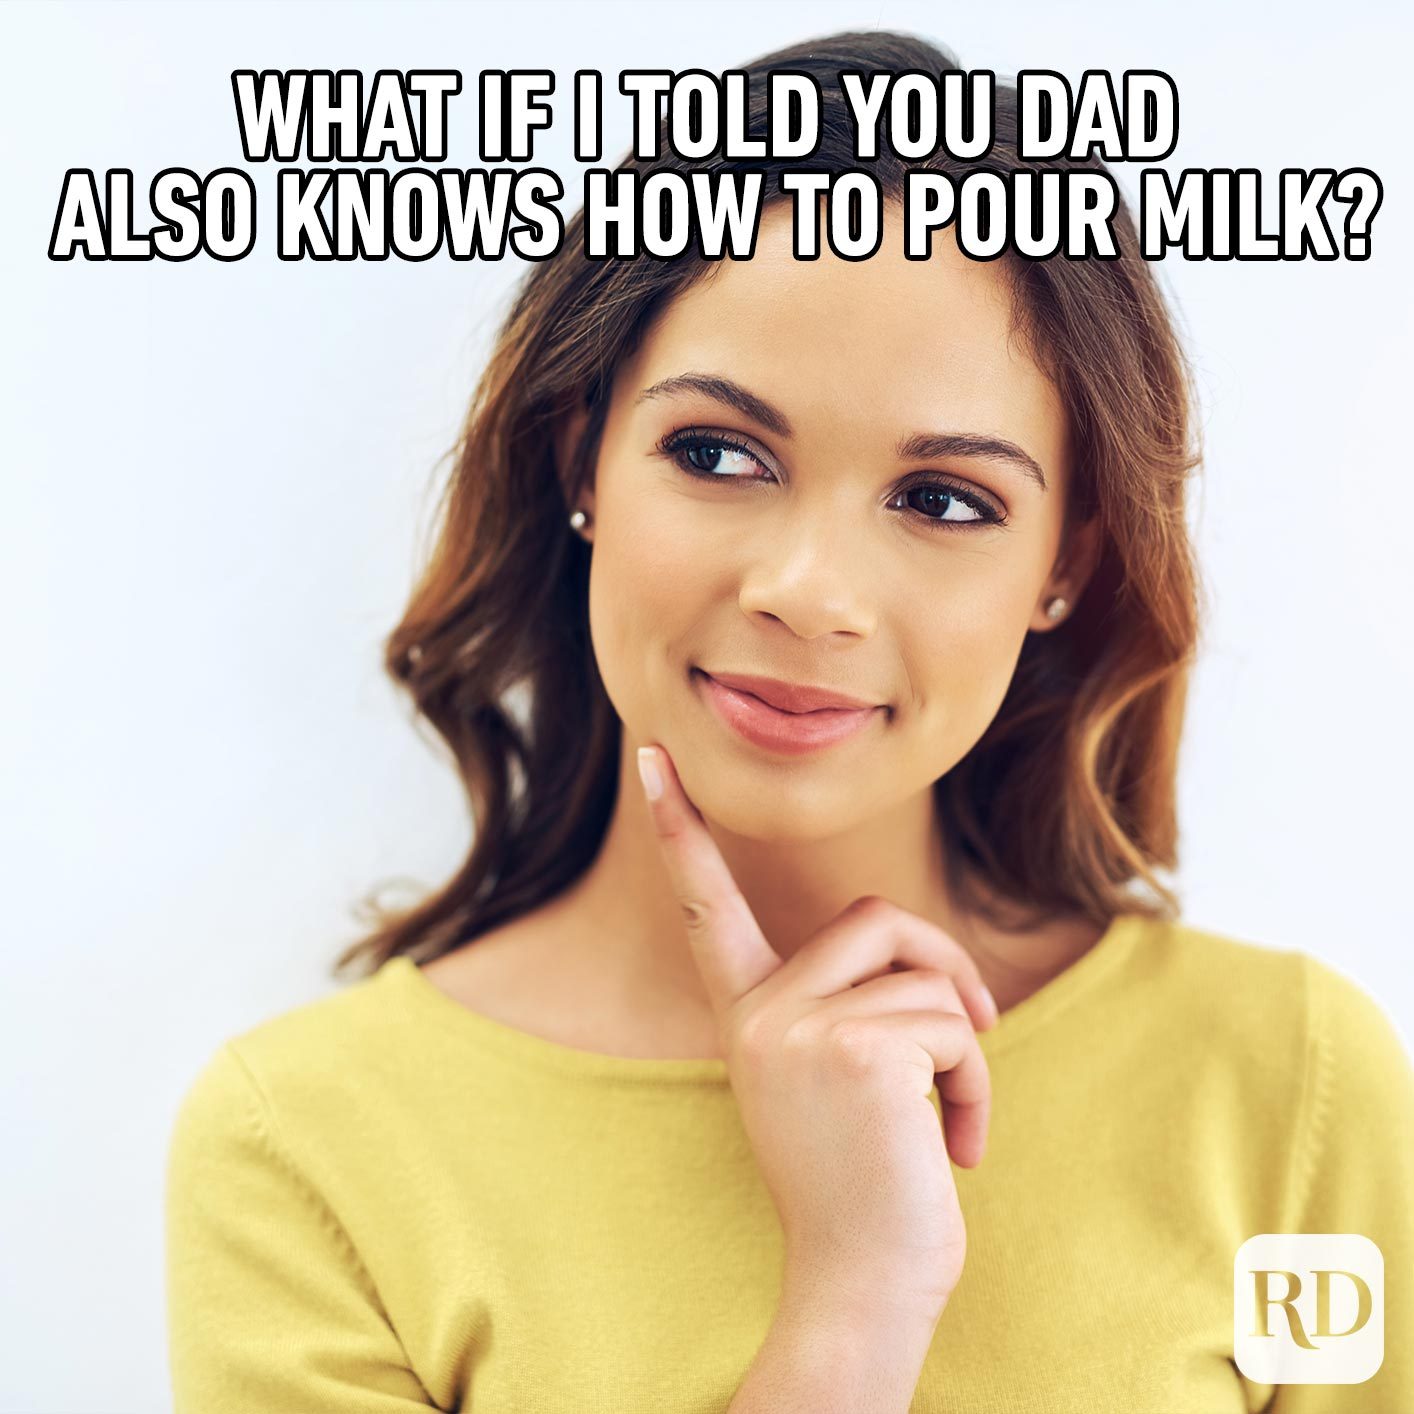 Woman thinking. MEME TEXT: What if I told you Dad also knows how to pour milk?